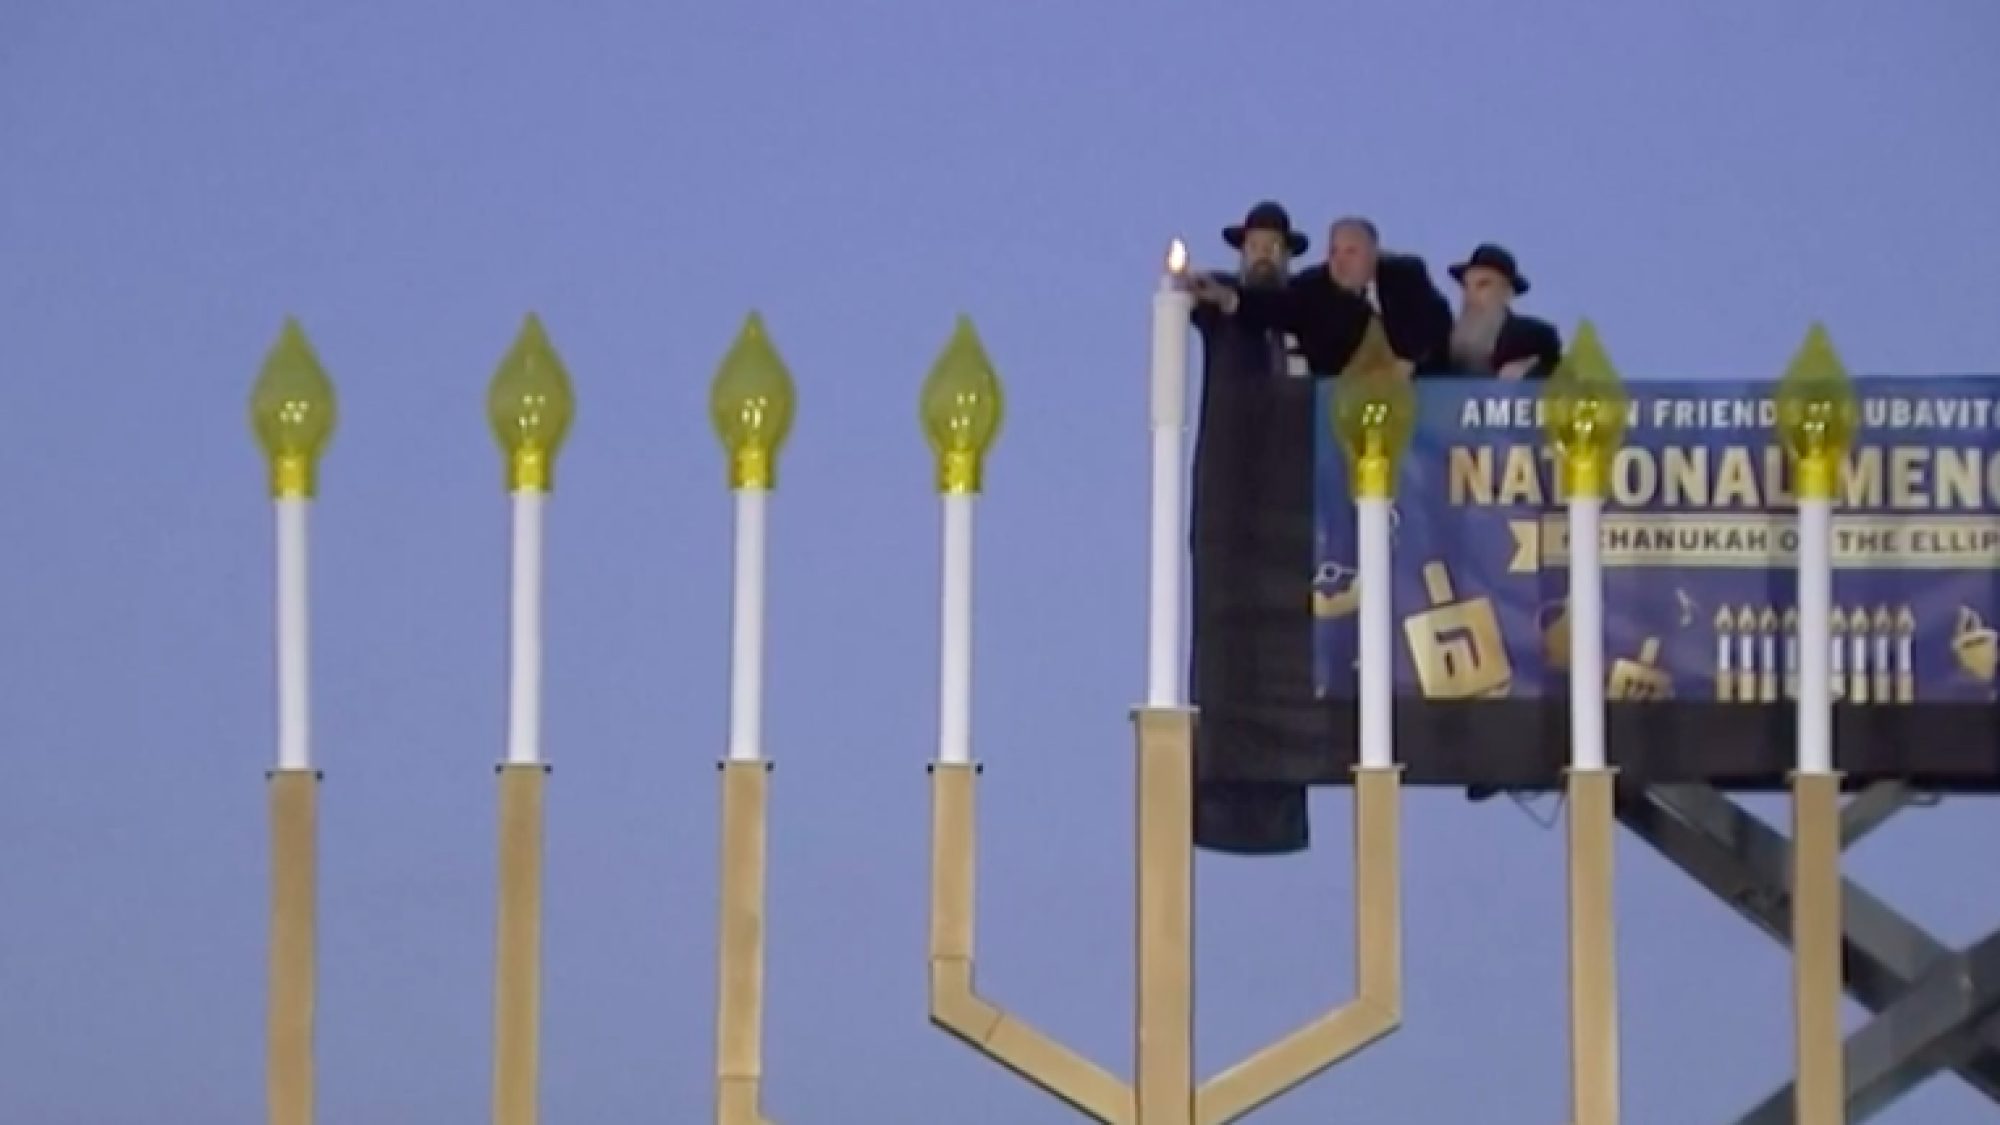 U.S. Interior Secretary David Bernhardt (center) helps light the shamash ("helper candle") of the National Menorah on the Ellipse near the White House in Washington, D.C., on Dec. 22, 2019, assisted by Rabbi Levi Shemtov (left), executive vice president of American Friends of Lubavitch (Chabad), and his father, Abraham Shemtov. Source: Screenshot.